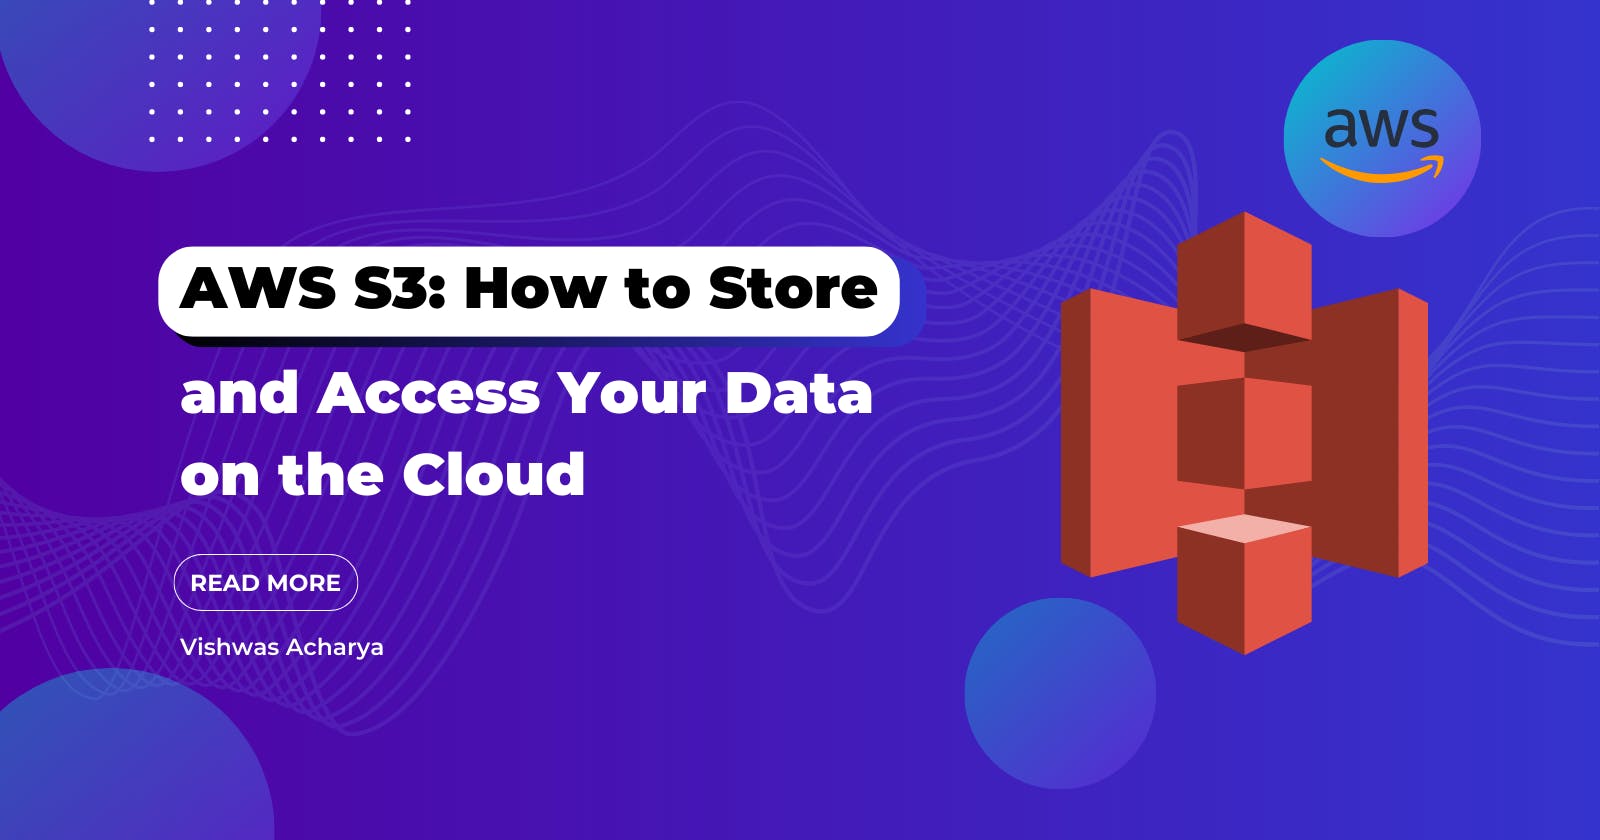 AWS S3: How to Store and Access Your Data on the Cloud